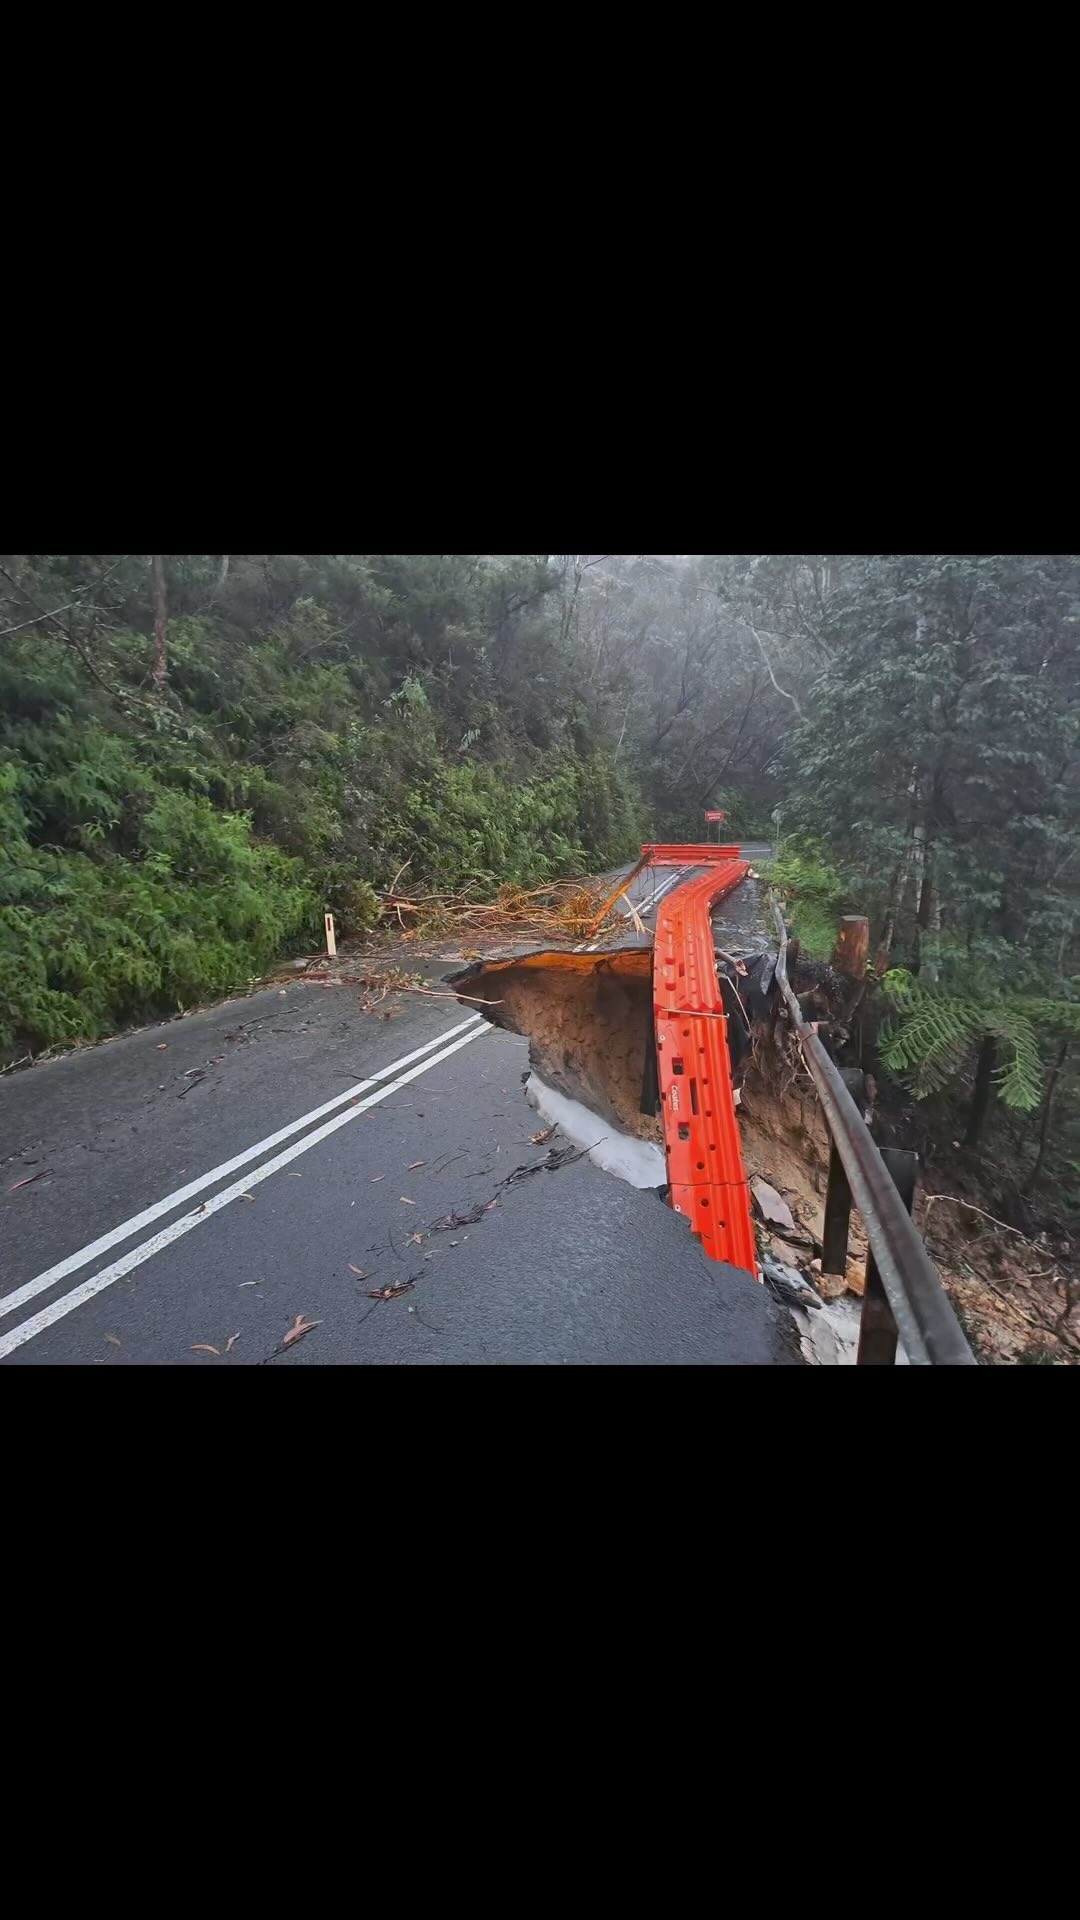 📍The recent heavy rains caused a severe landslip down Megalong Road, blocking access to and from Megalong Valley

📍Nearly 200 visitors were evacuated during the weekend through private properties

📍We’ve got food and fuel dropped off the last 2 days by helicopters

📍Blue Mts Council, the SES and Police, along with local businesses, are working to reopen the road as soon as possible

📍Thanks everyone for checking on us and for your kind messages

📍We’re so grateful for our beautiful community and our customers support 

@megalongvalley @megalongvalleytearooms @megalong_lot101 @nswrfs @bluemountainscitycouncil 

#megalongvalley #landslide #bluemountains #naturaldisaster